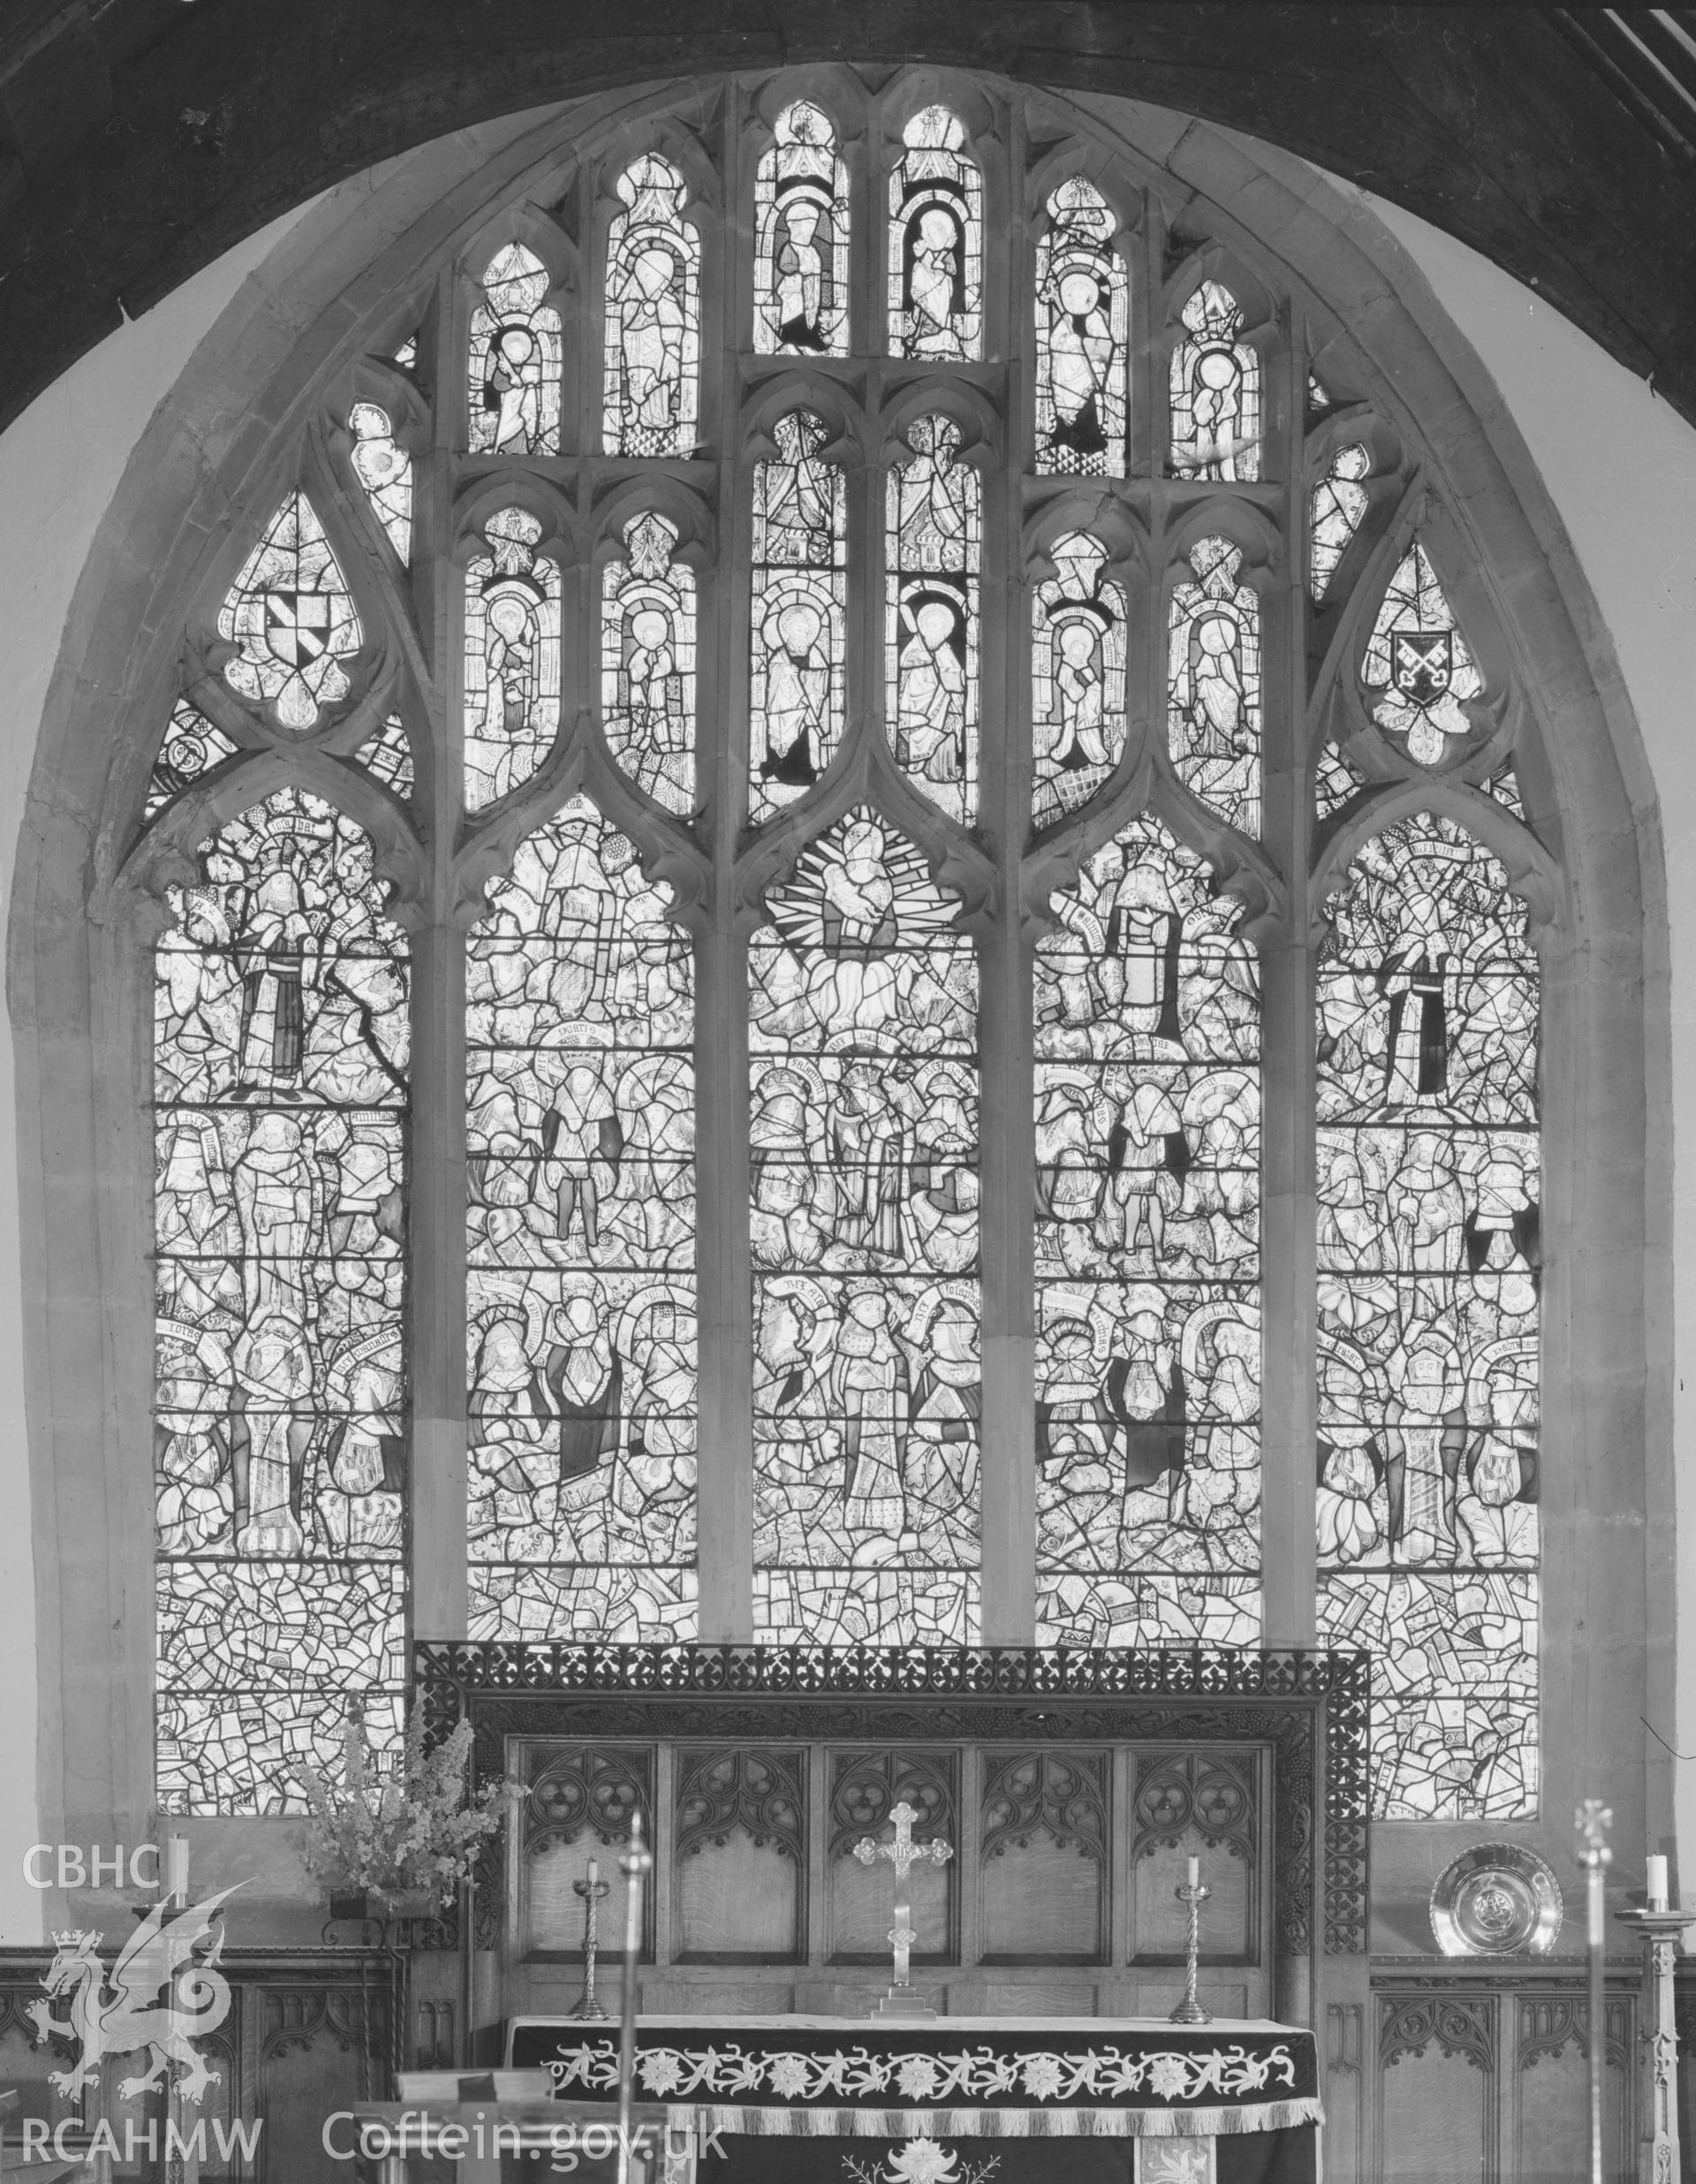 Black and white acetate negative showing stained glass window at Dyserth Church.